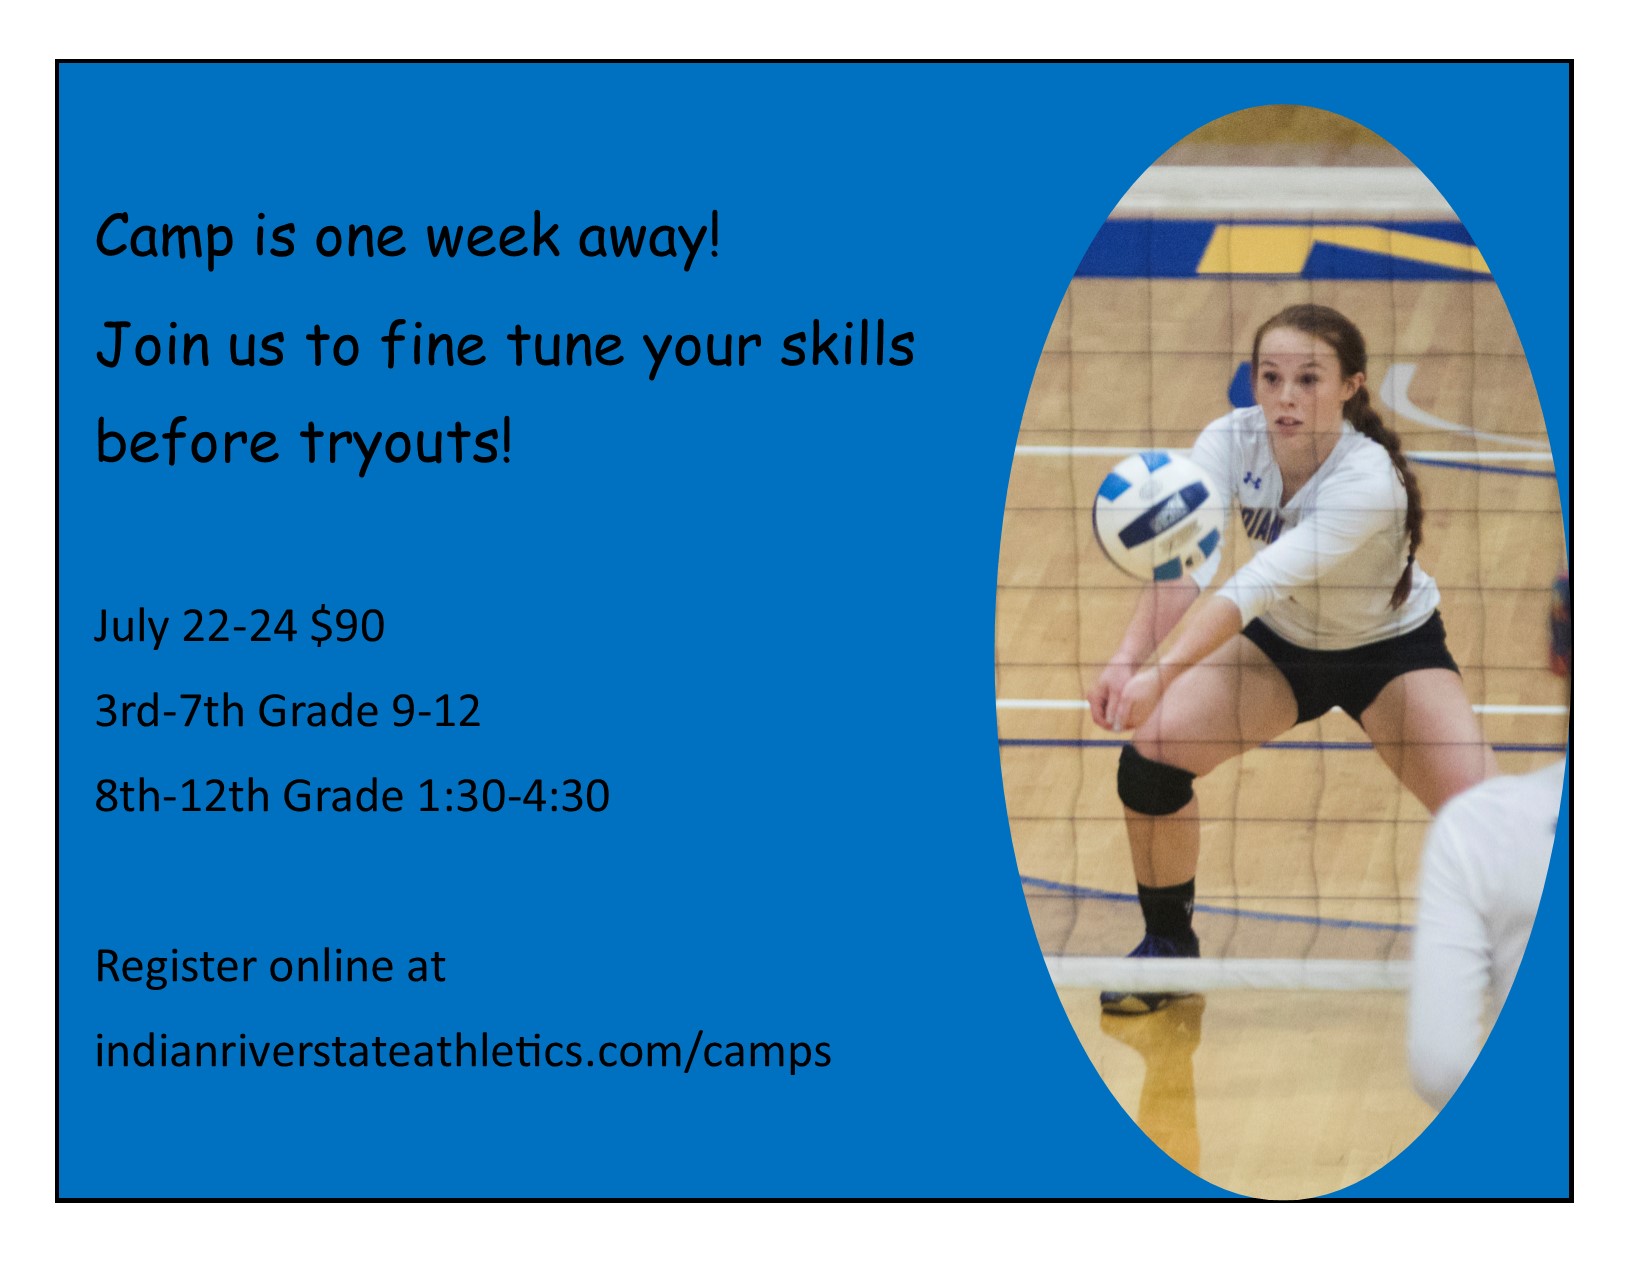 10th Annual IRSC Volleyball Camp